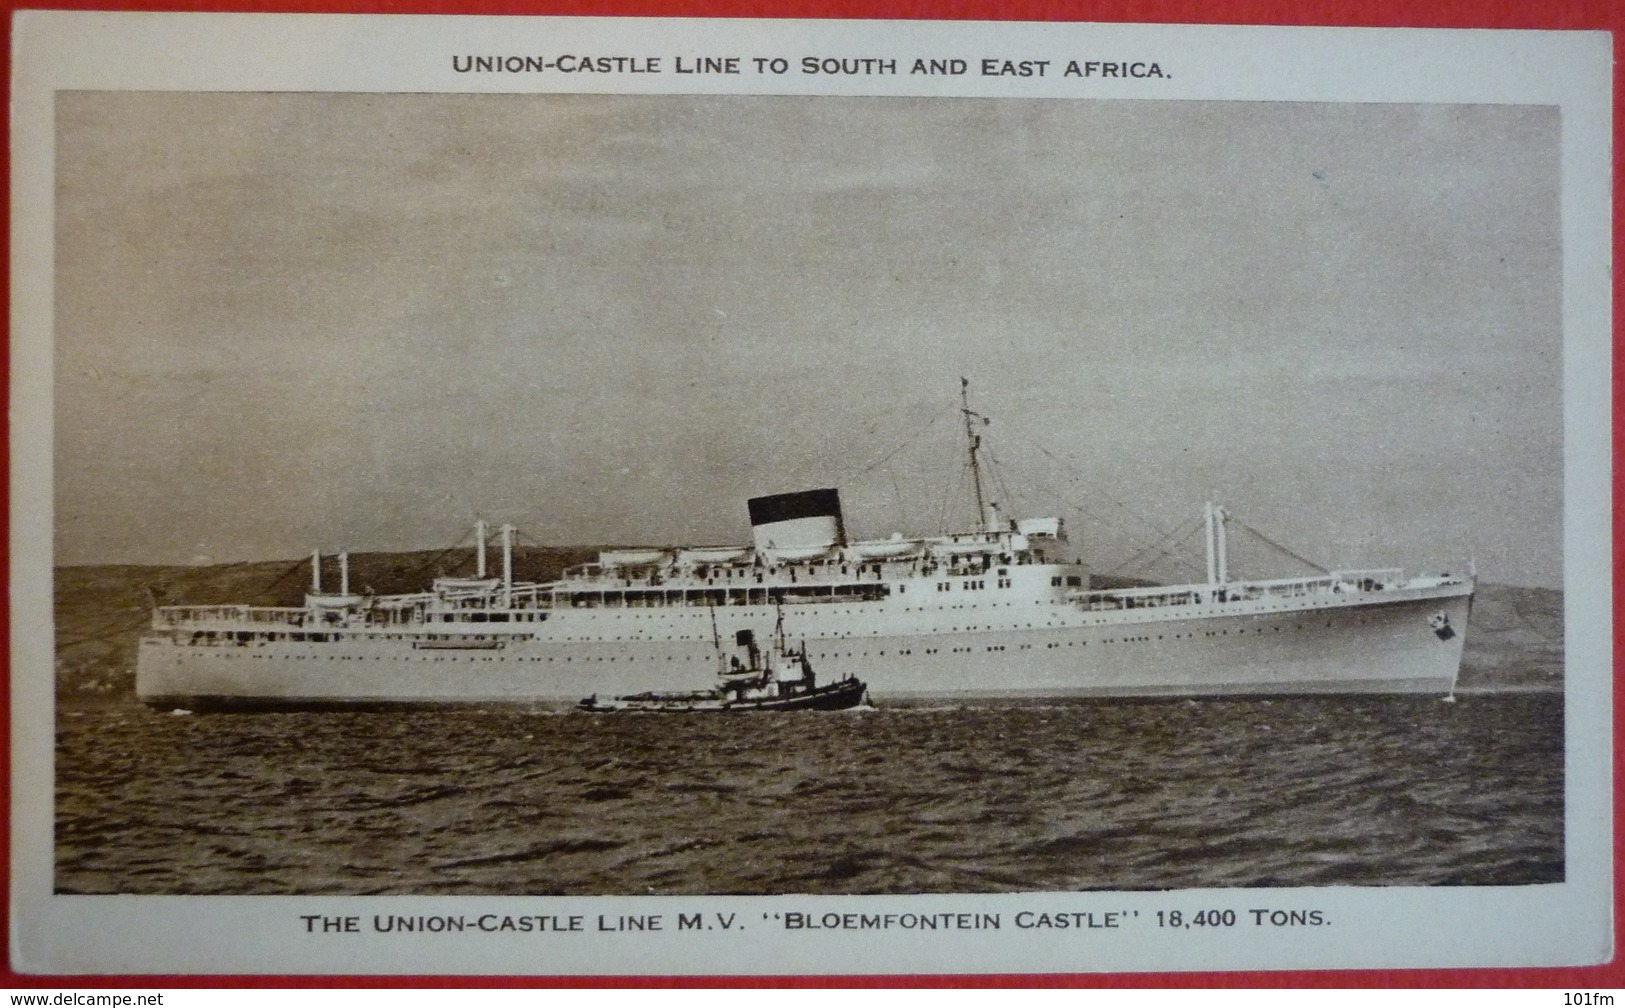 THE UNION-CASTLE LINE S.S.BLOEMFONTEIN CASTLE , LINE TO SOUTH AND EAST AFRICA - Dampfer